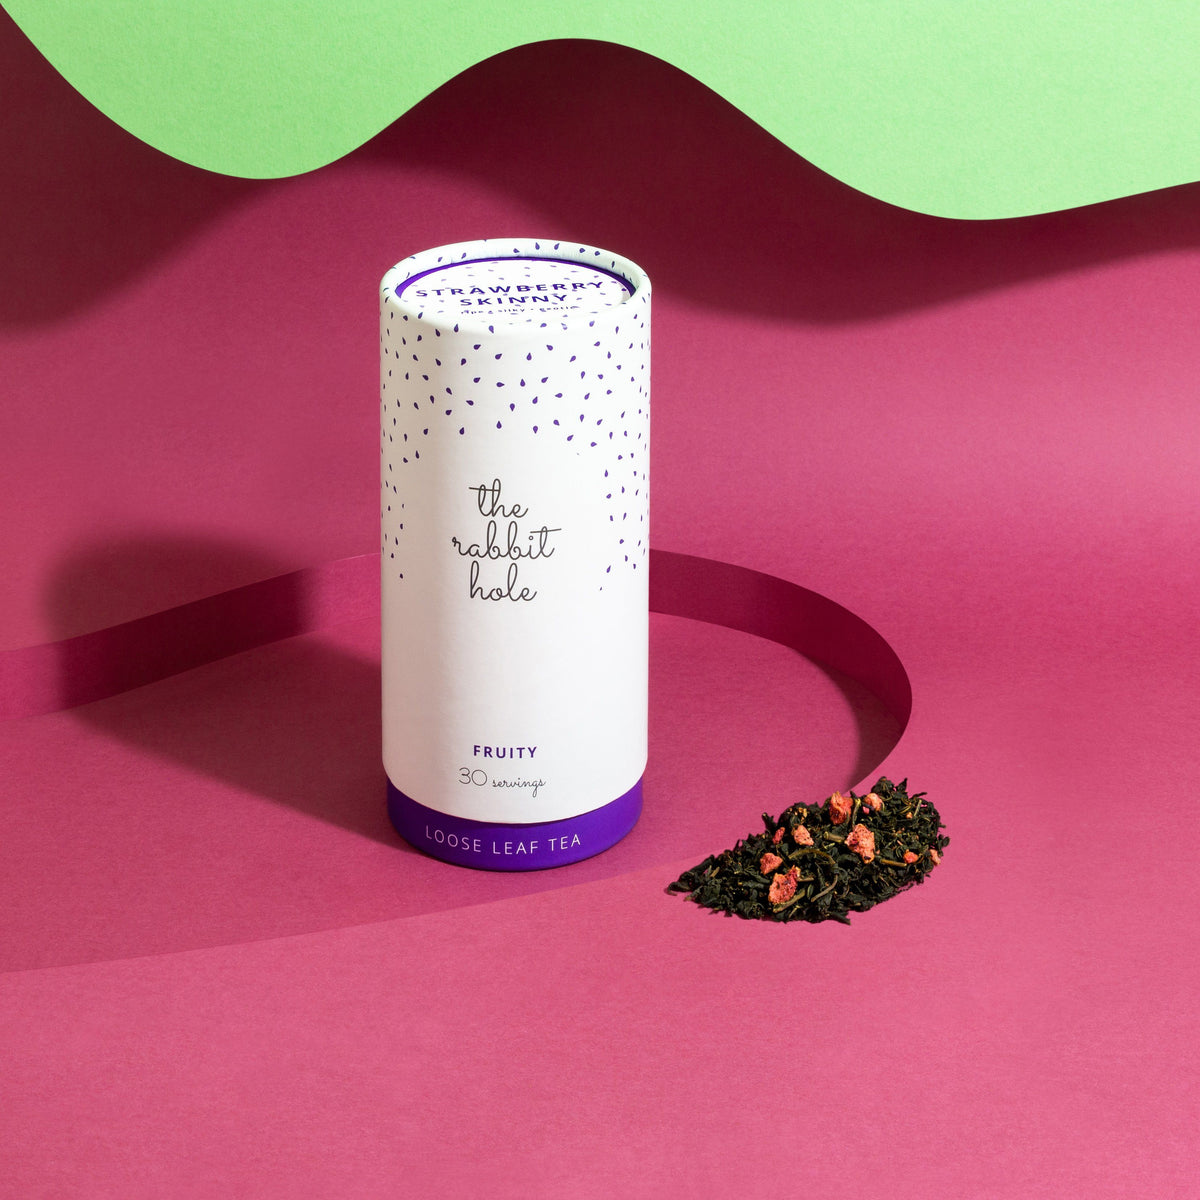 Strawberry Skinny Loose leaf Fruity tea by The Rabbit Hole - Australian Made Tea - canister on a bright pink and green background